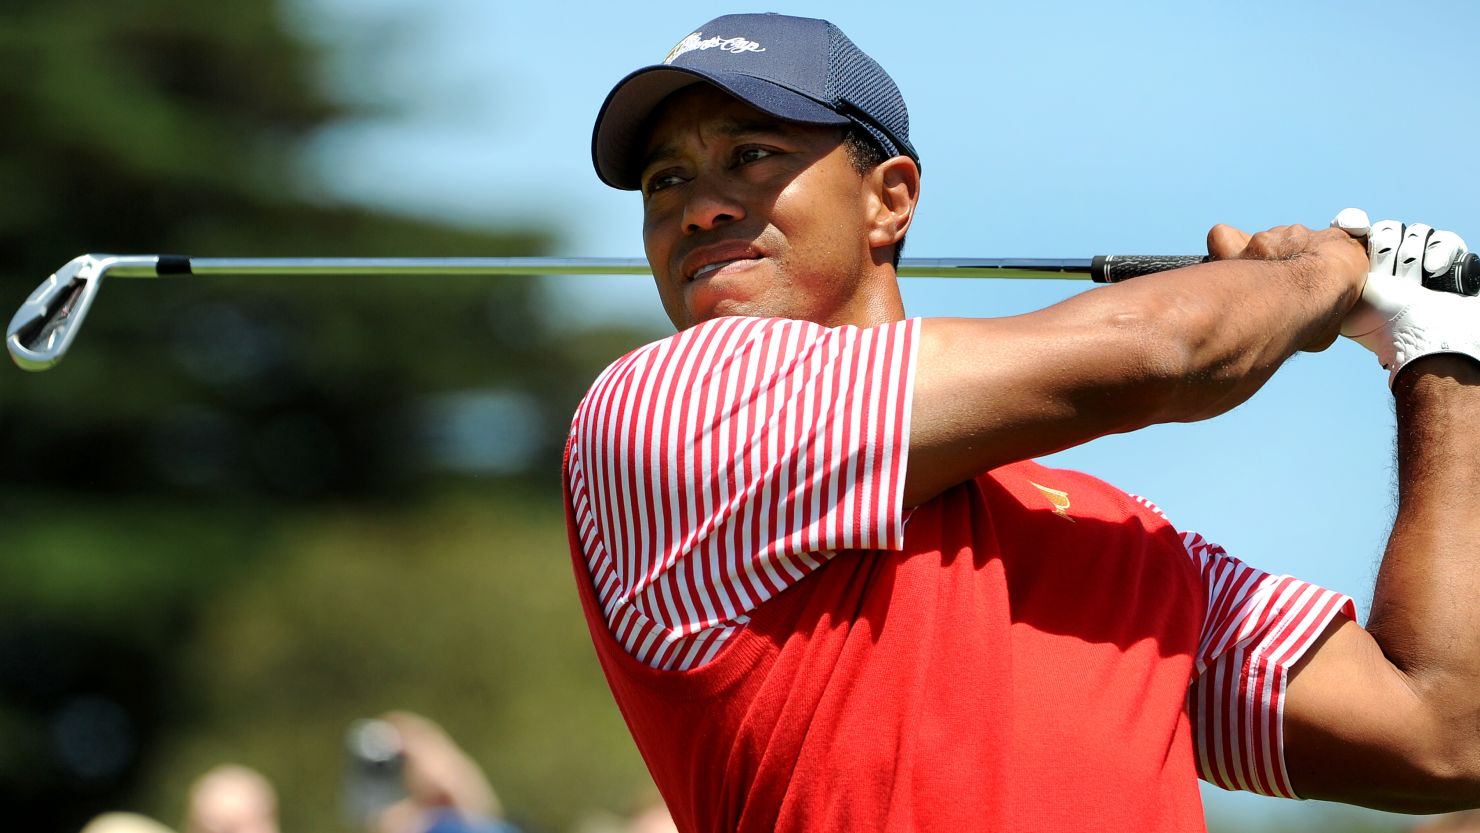 American golfer Tiger Woods is competing in his seventh Presidents Cup.